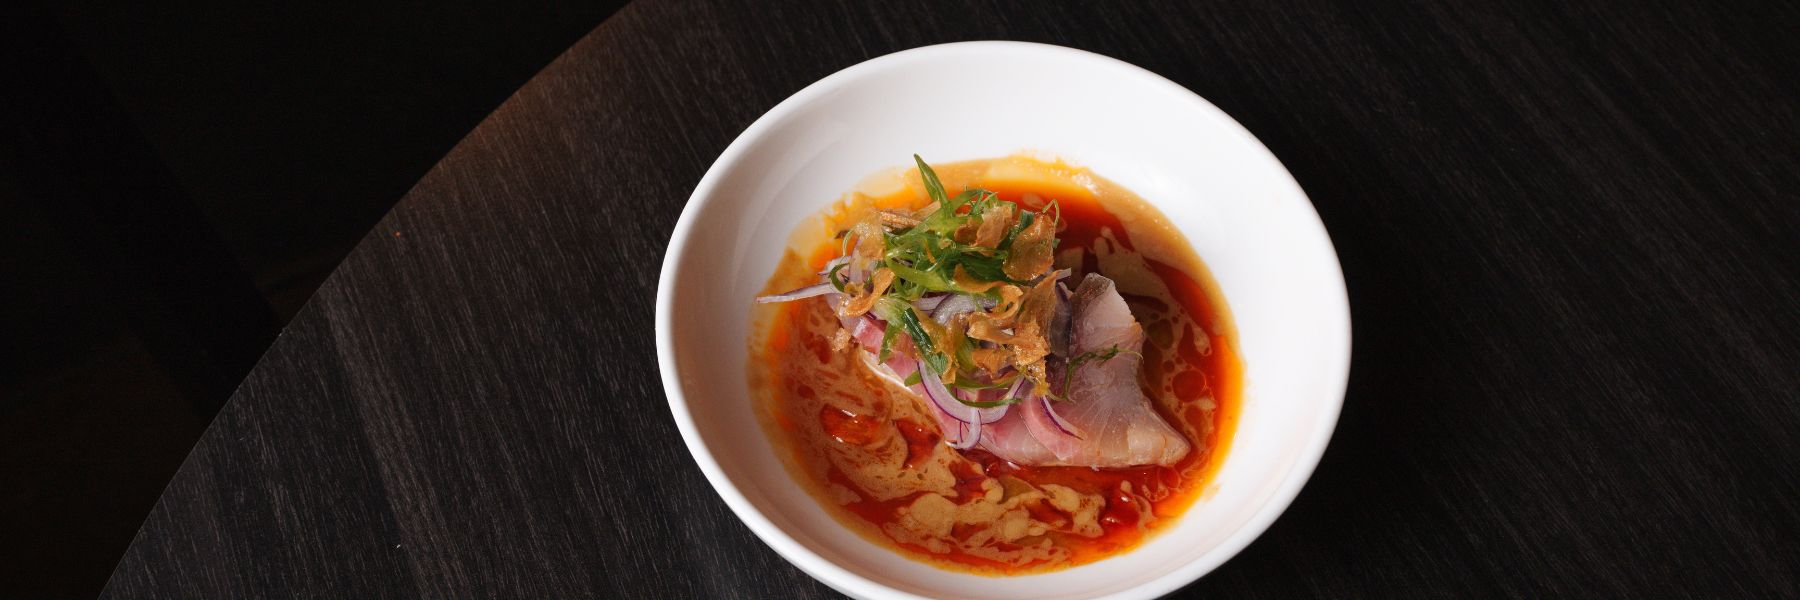 At Indo, chef Nick Bognar pairs fatty yellowtail with coconut nam pla (fish sauce), Thai kosho (a play on traditional yuzu kosho), candied garlic and housemade chile oil.